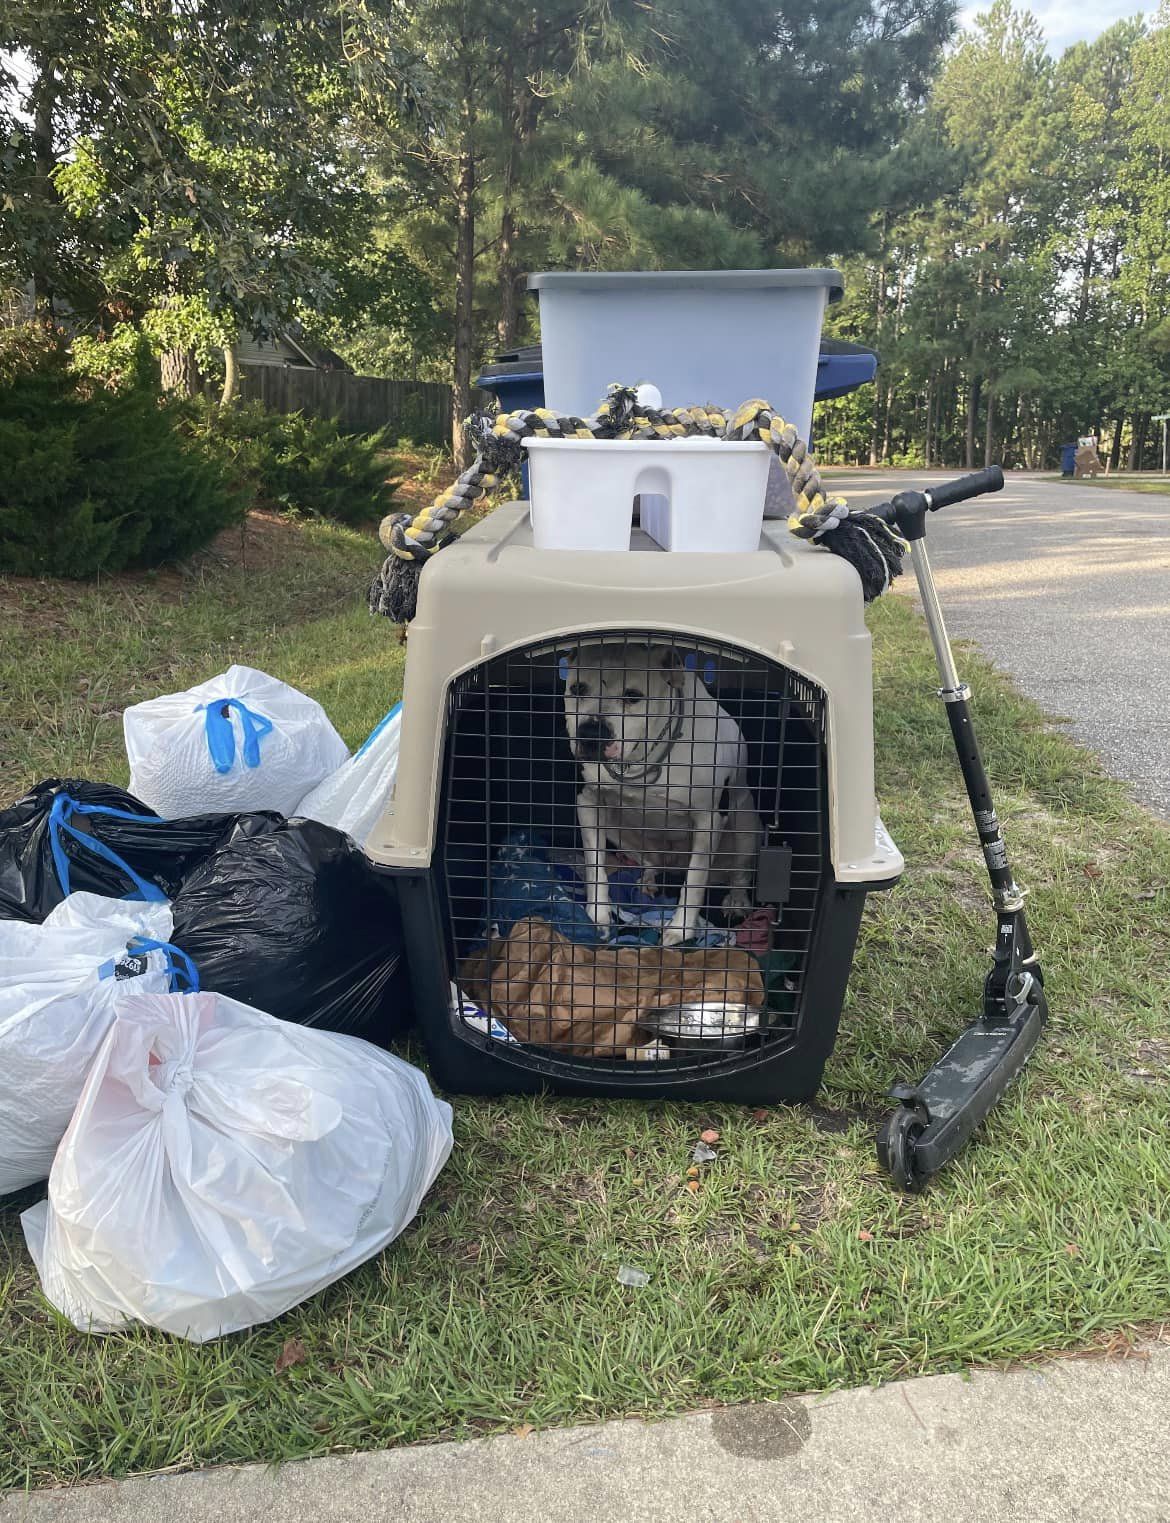 Dog who was set out with the trash has been adopted